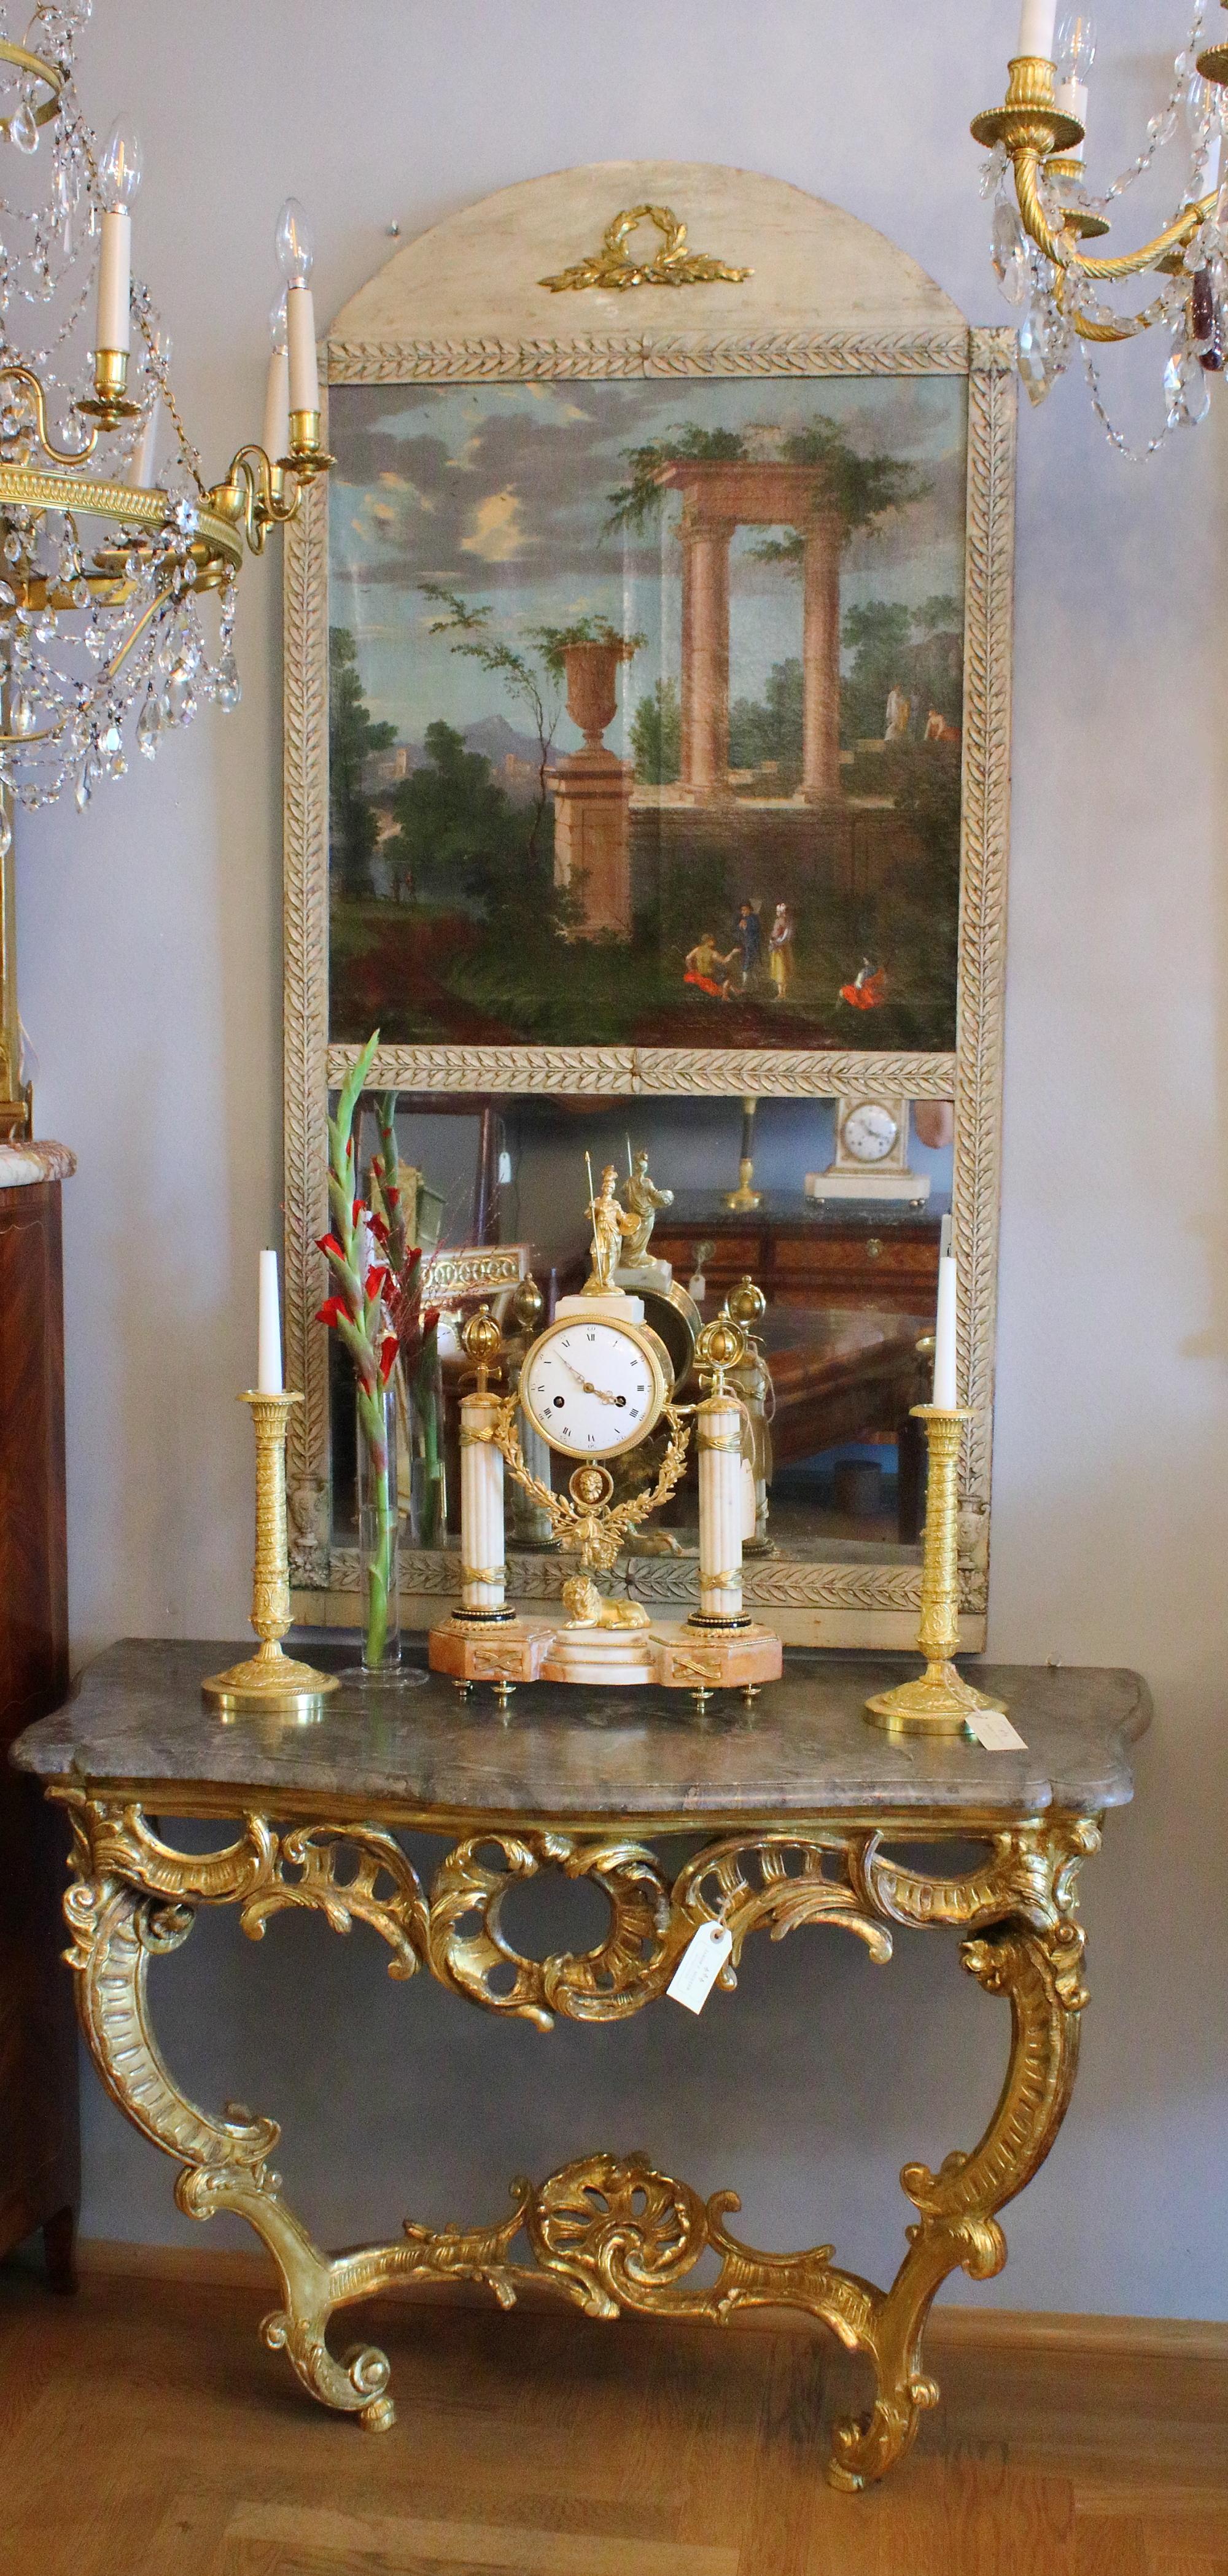 Late 18th Century Italian Neoclassical Wall Mirror with 'Capriccio' Painting 9